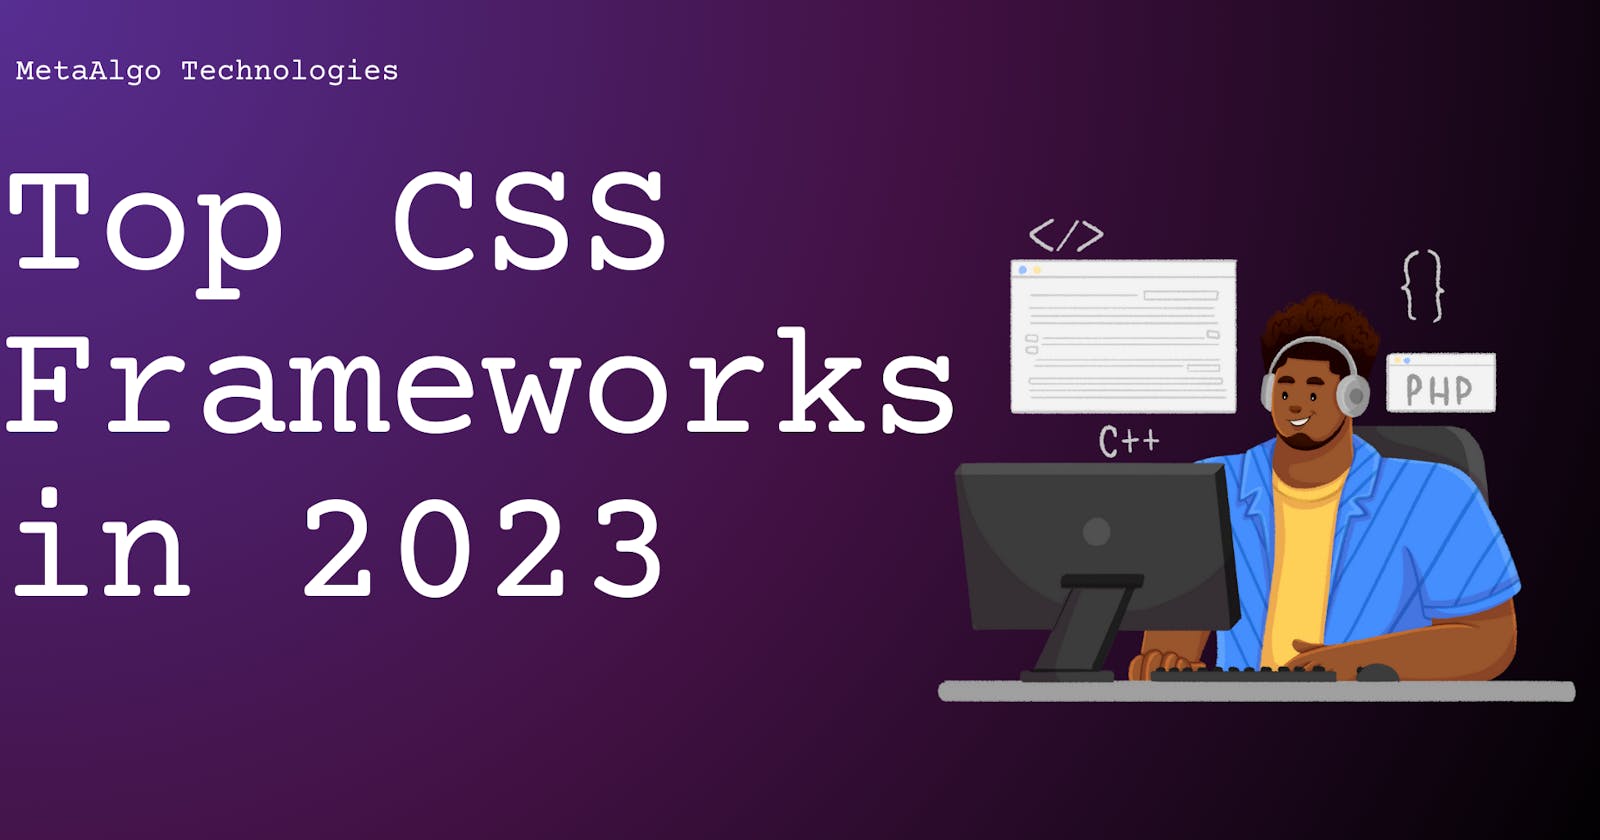 Comparison of Top CSS frameworks in 2023